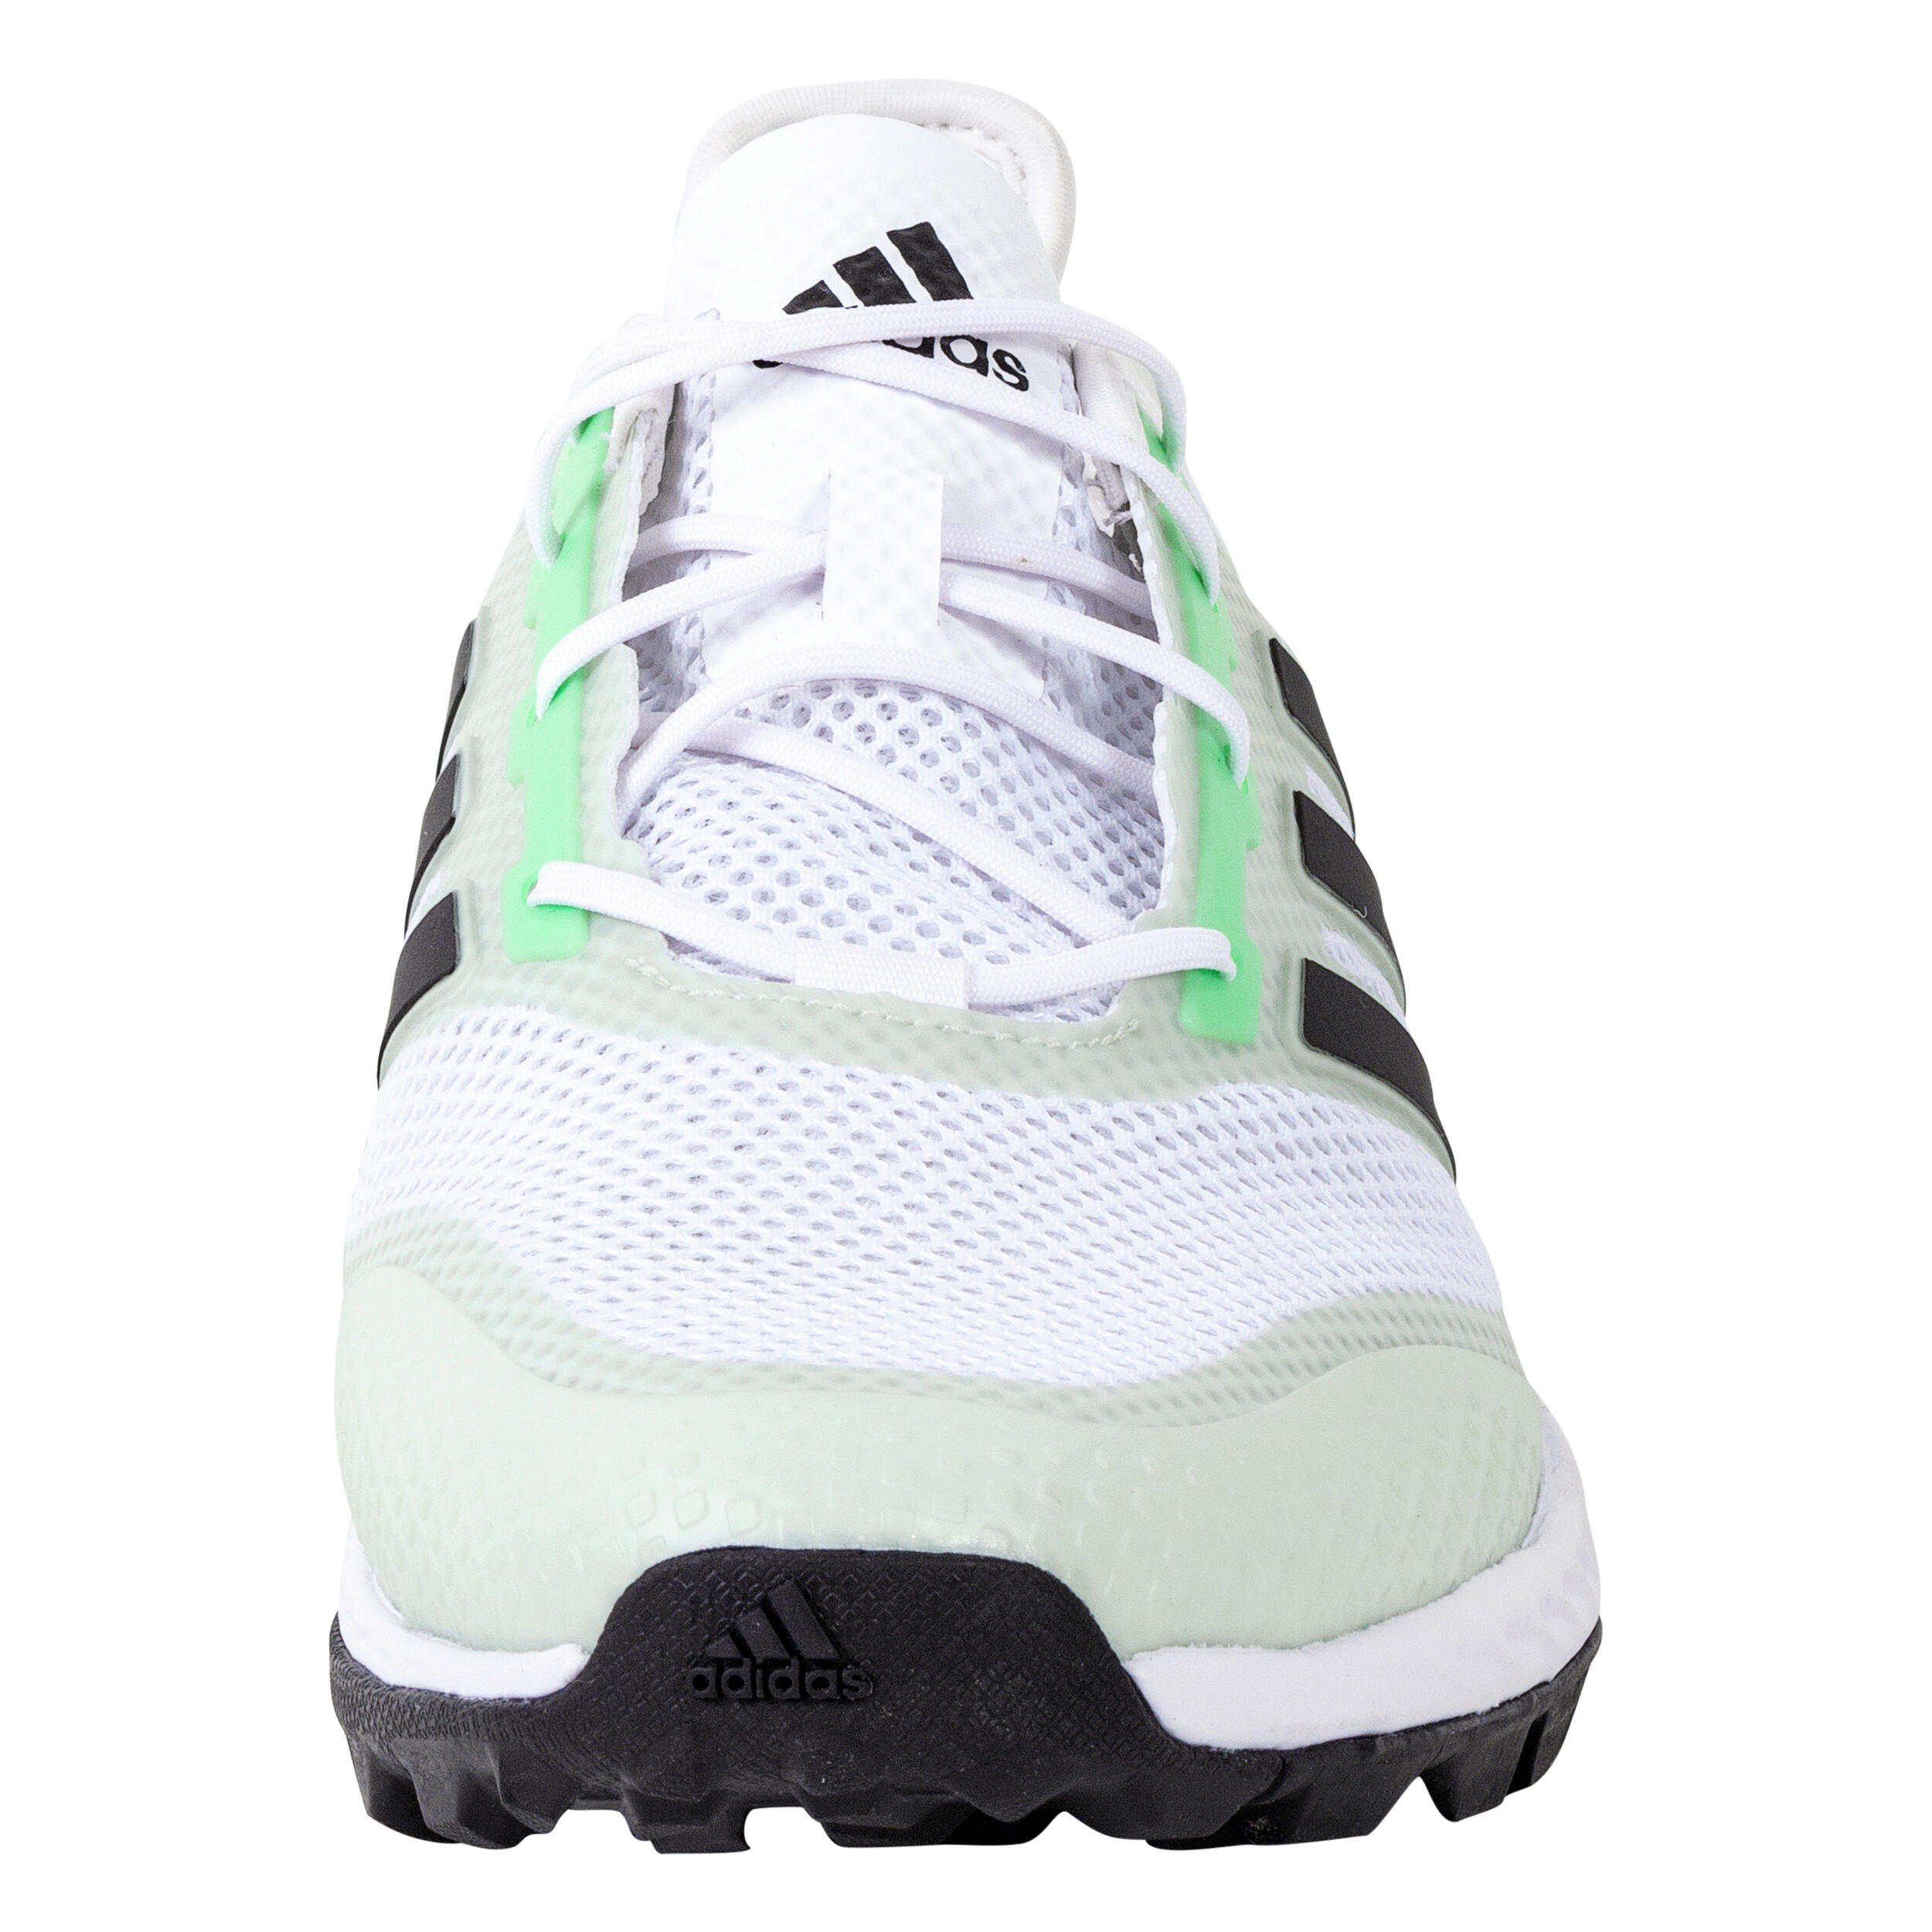 Adult High-Intensity Field Hockey Shoes Adipower - White 4/7